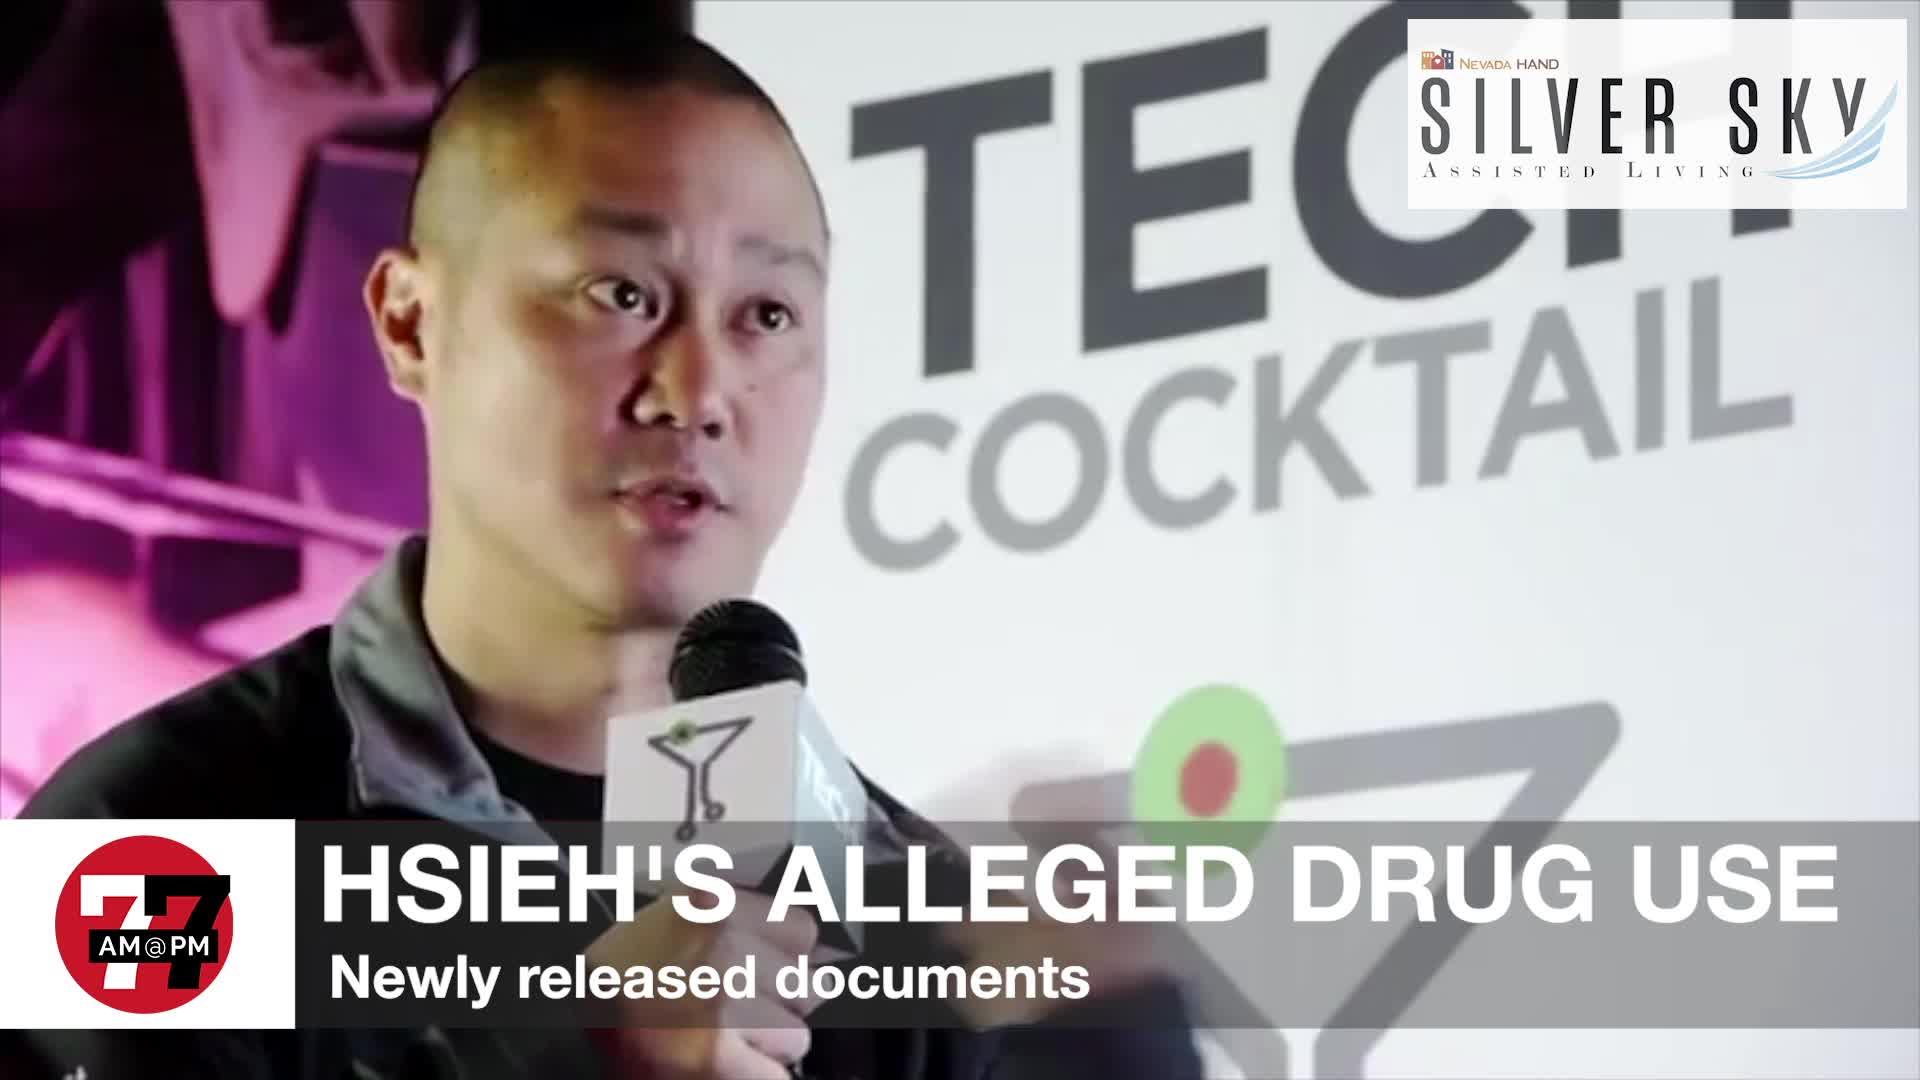 7@7PM Tony Hsieh’s Alleged Drug Use